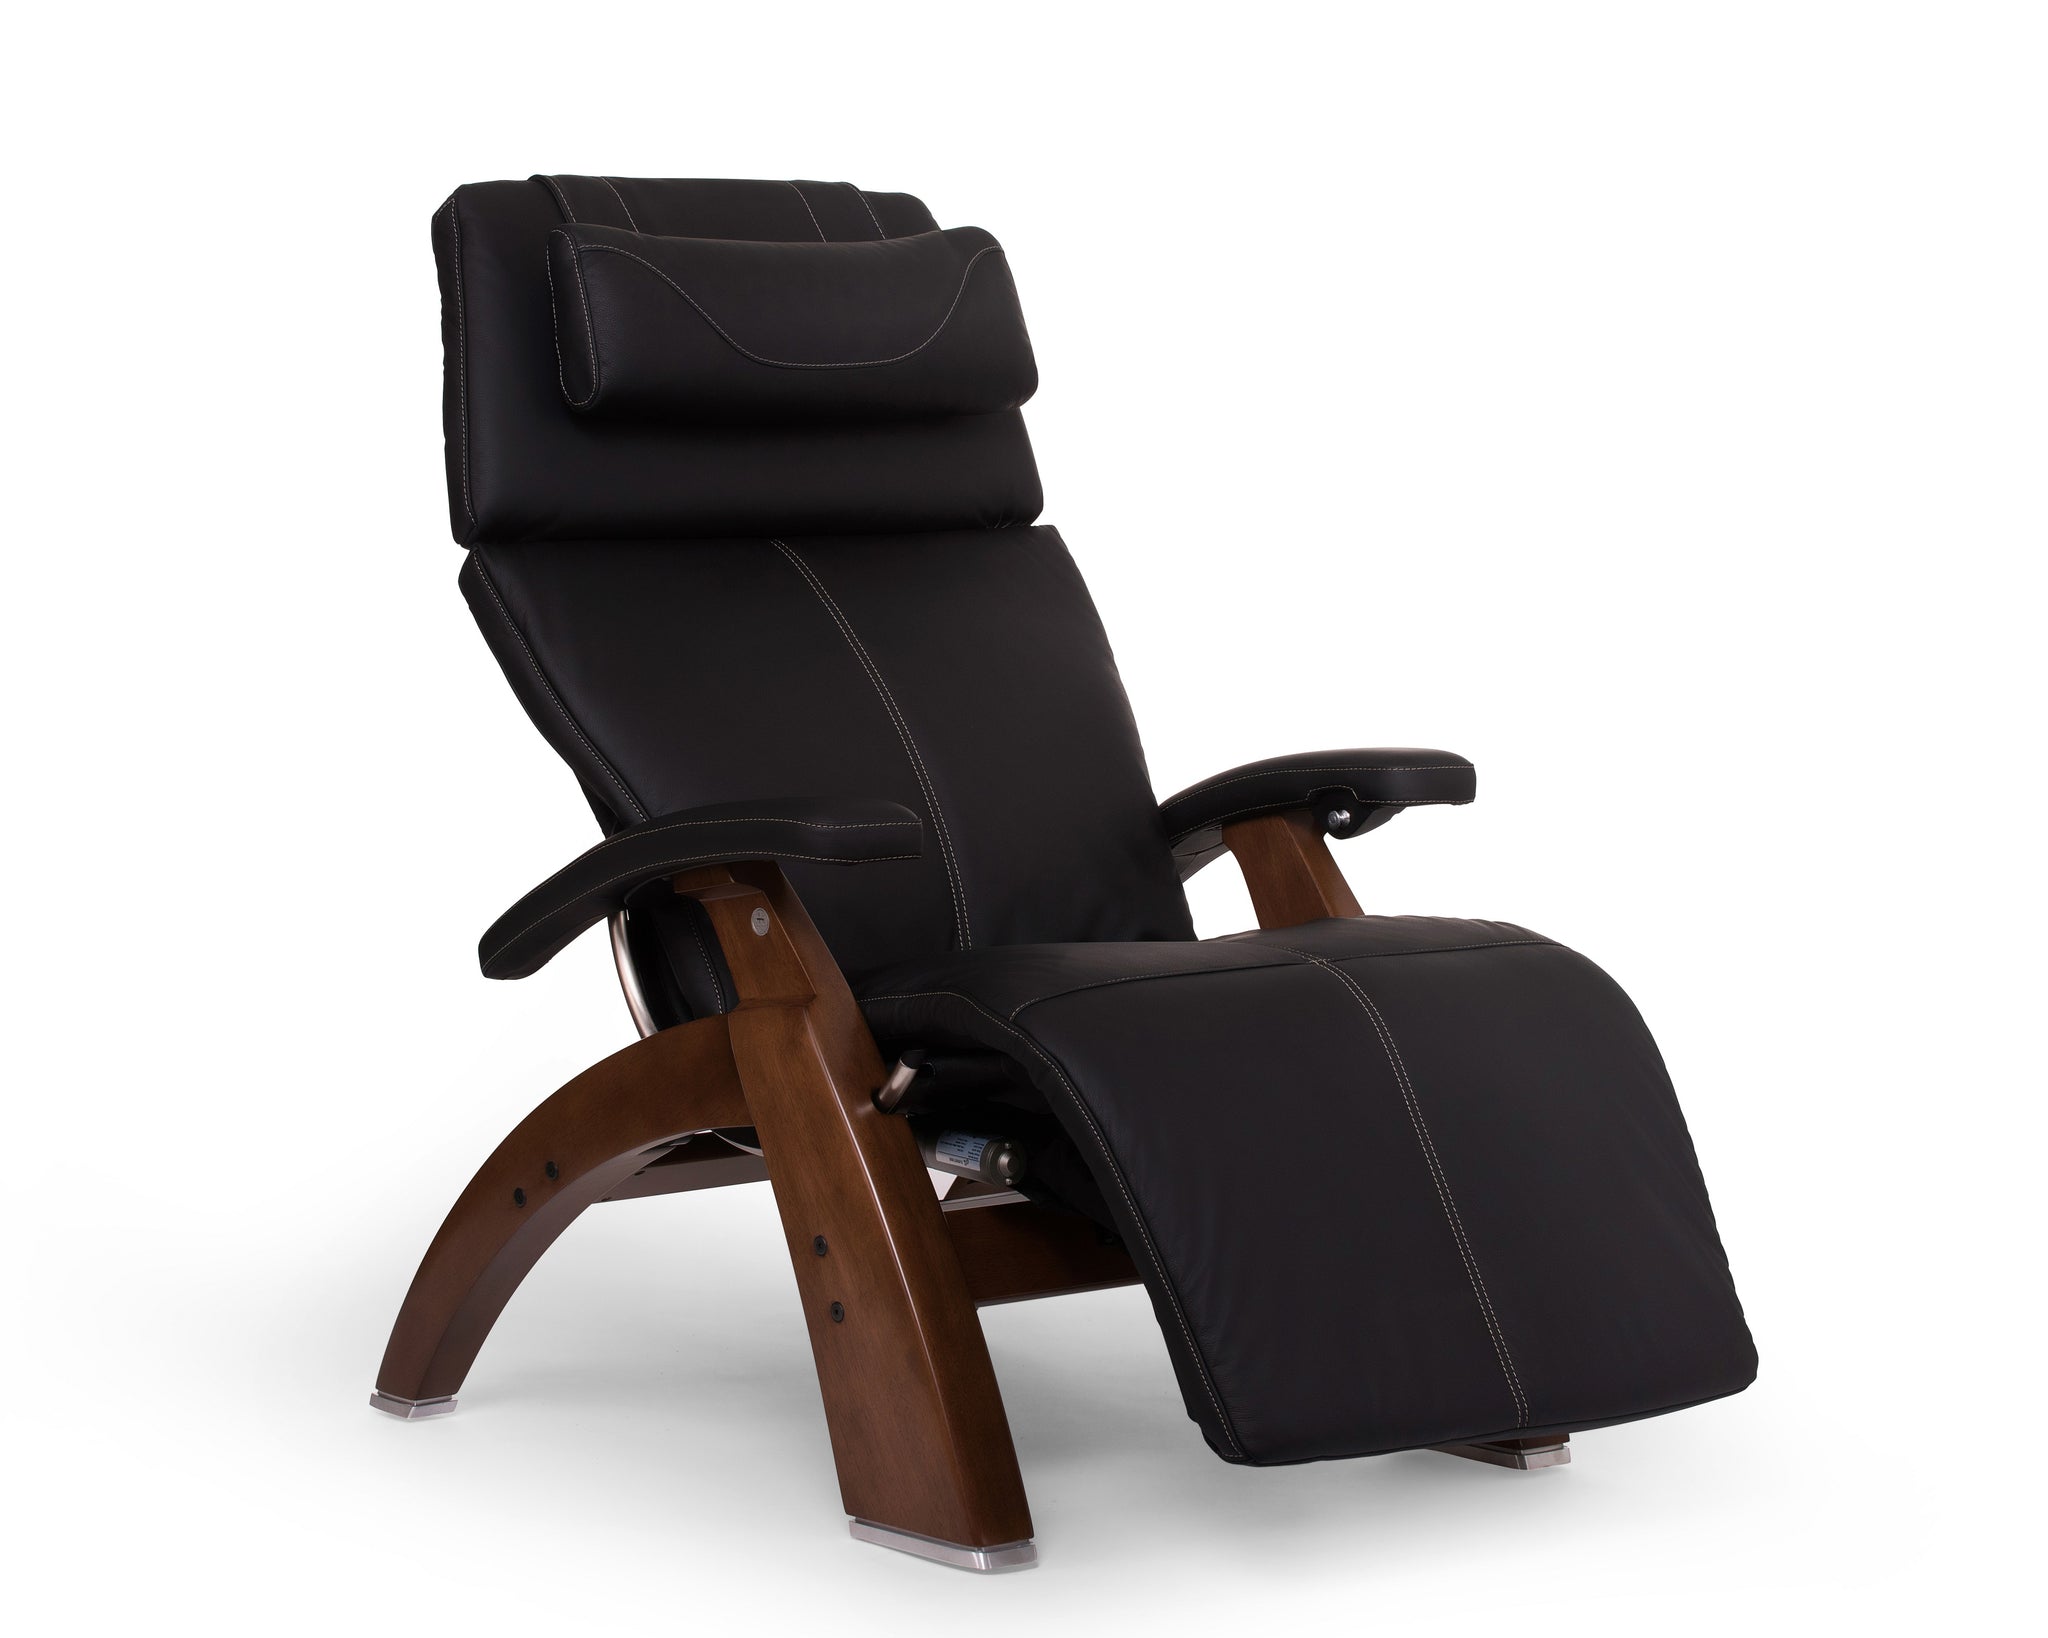 Human Touch Perfect Chair PC-610 Omni-Motion Classic